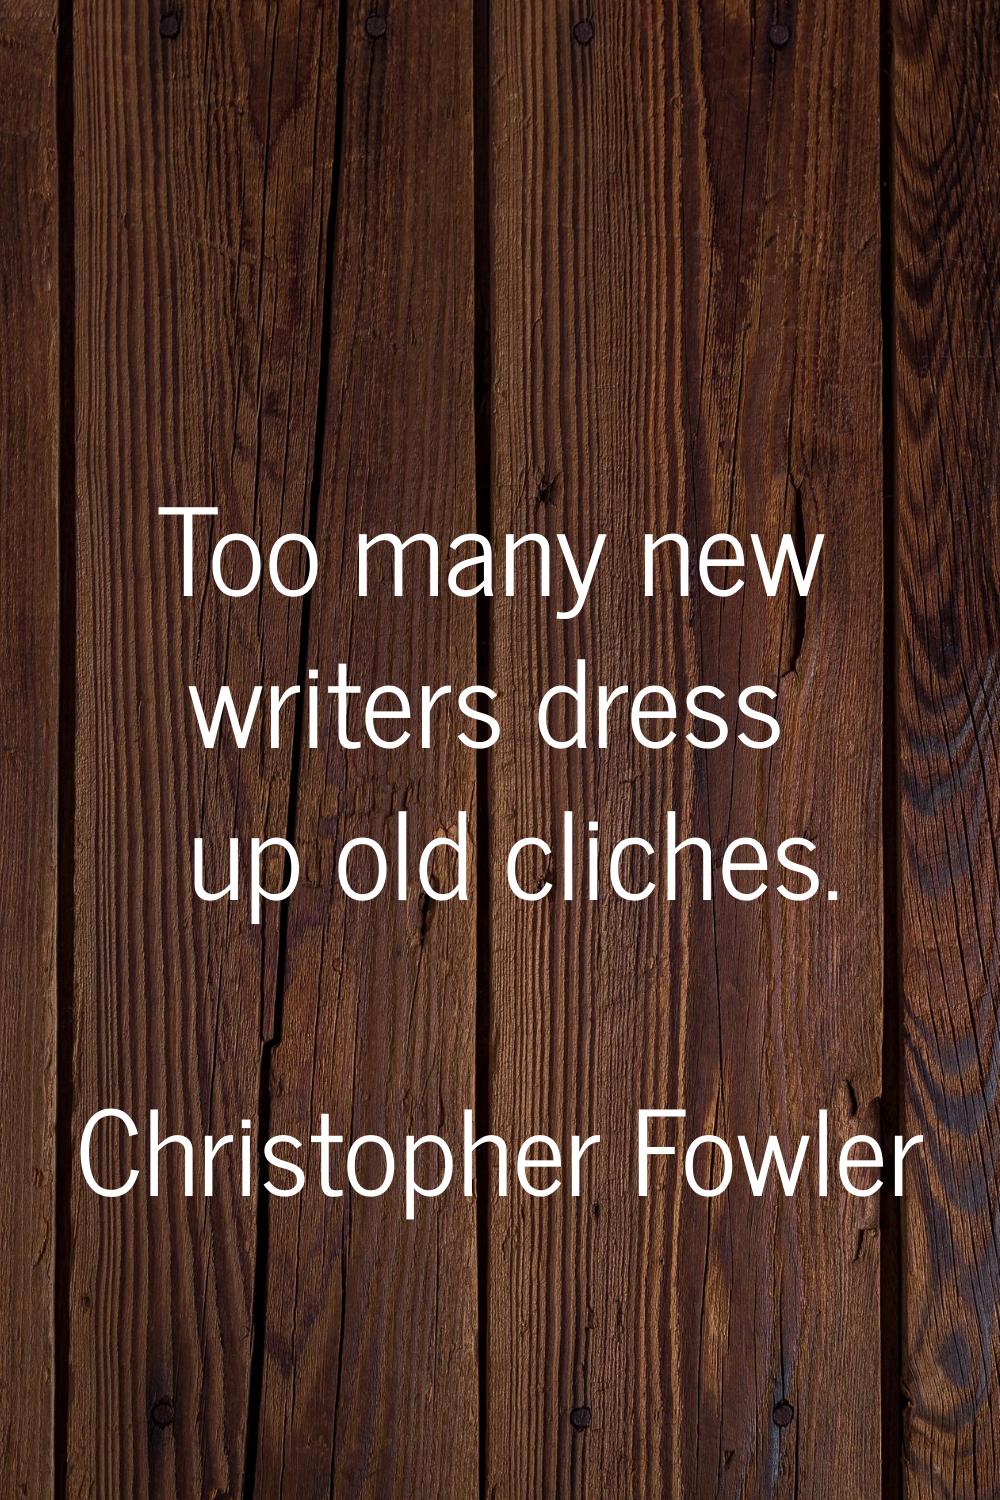 Too many new writers dress up old cliches.